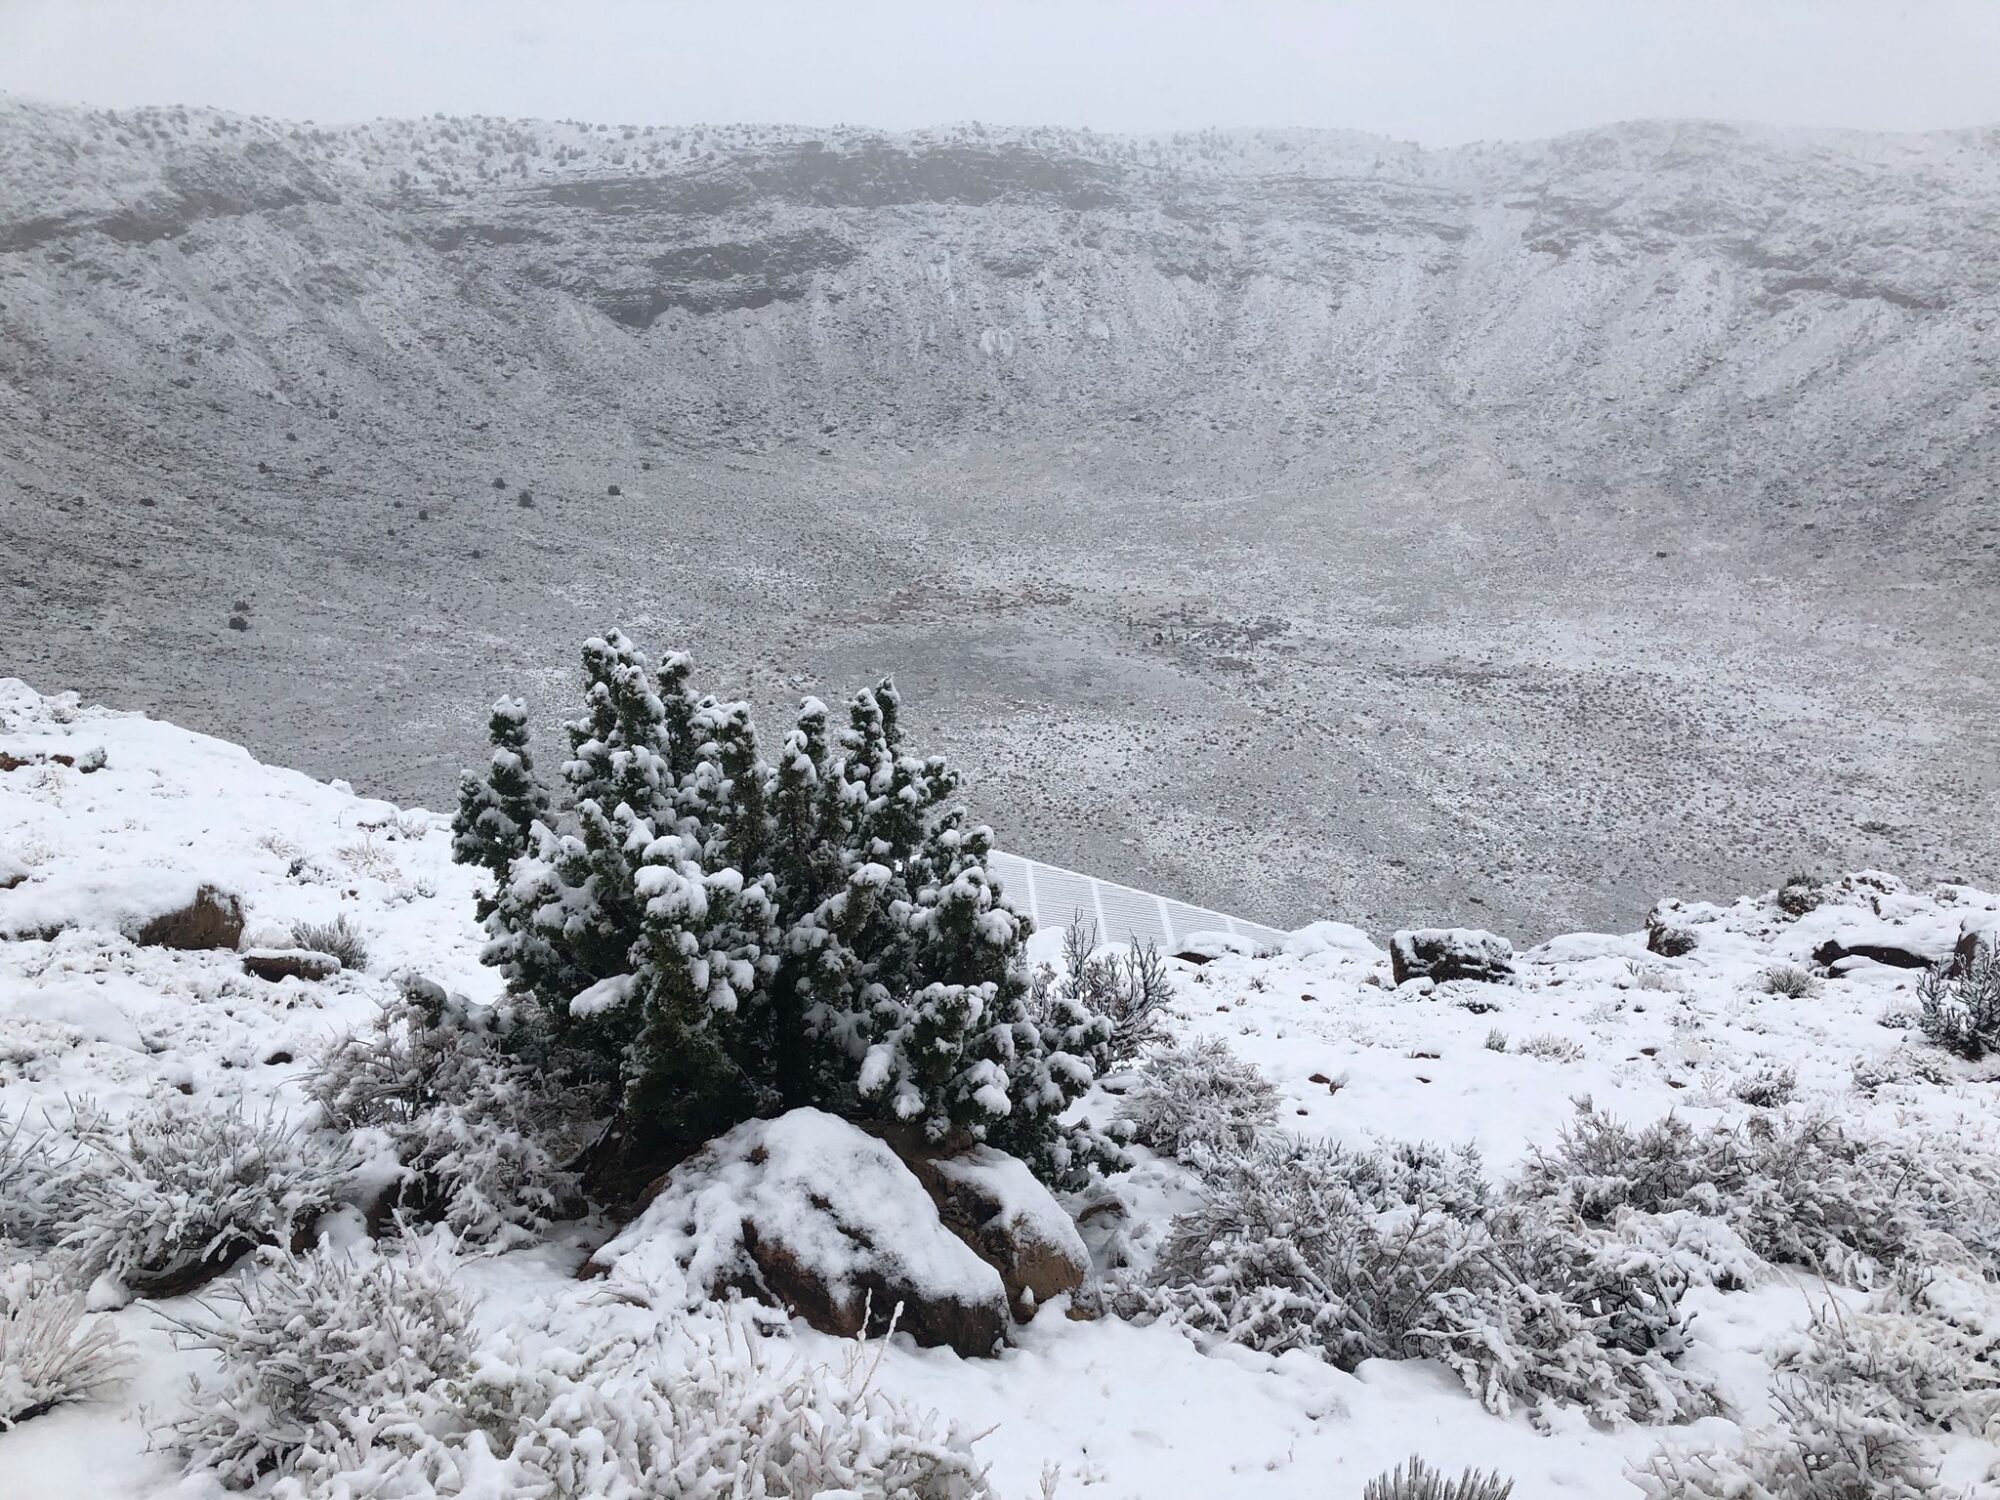 Snow covered Meteor Crater with a small plant in the foreground.